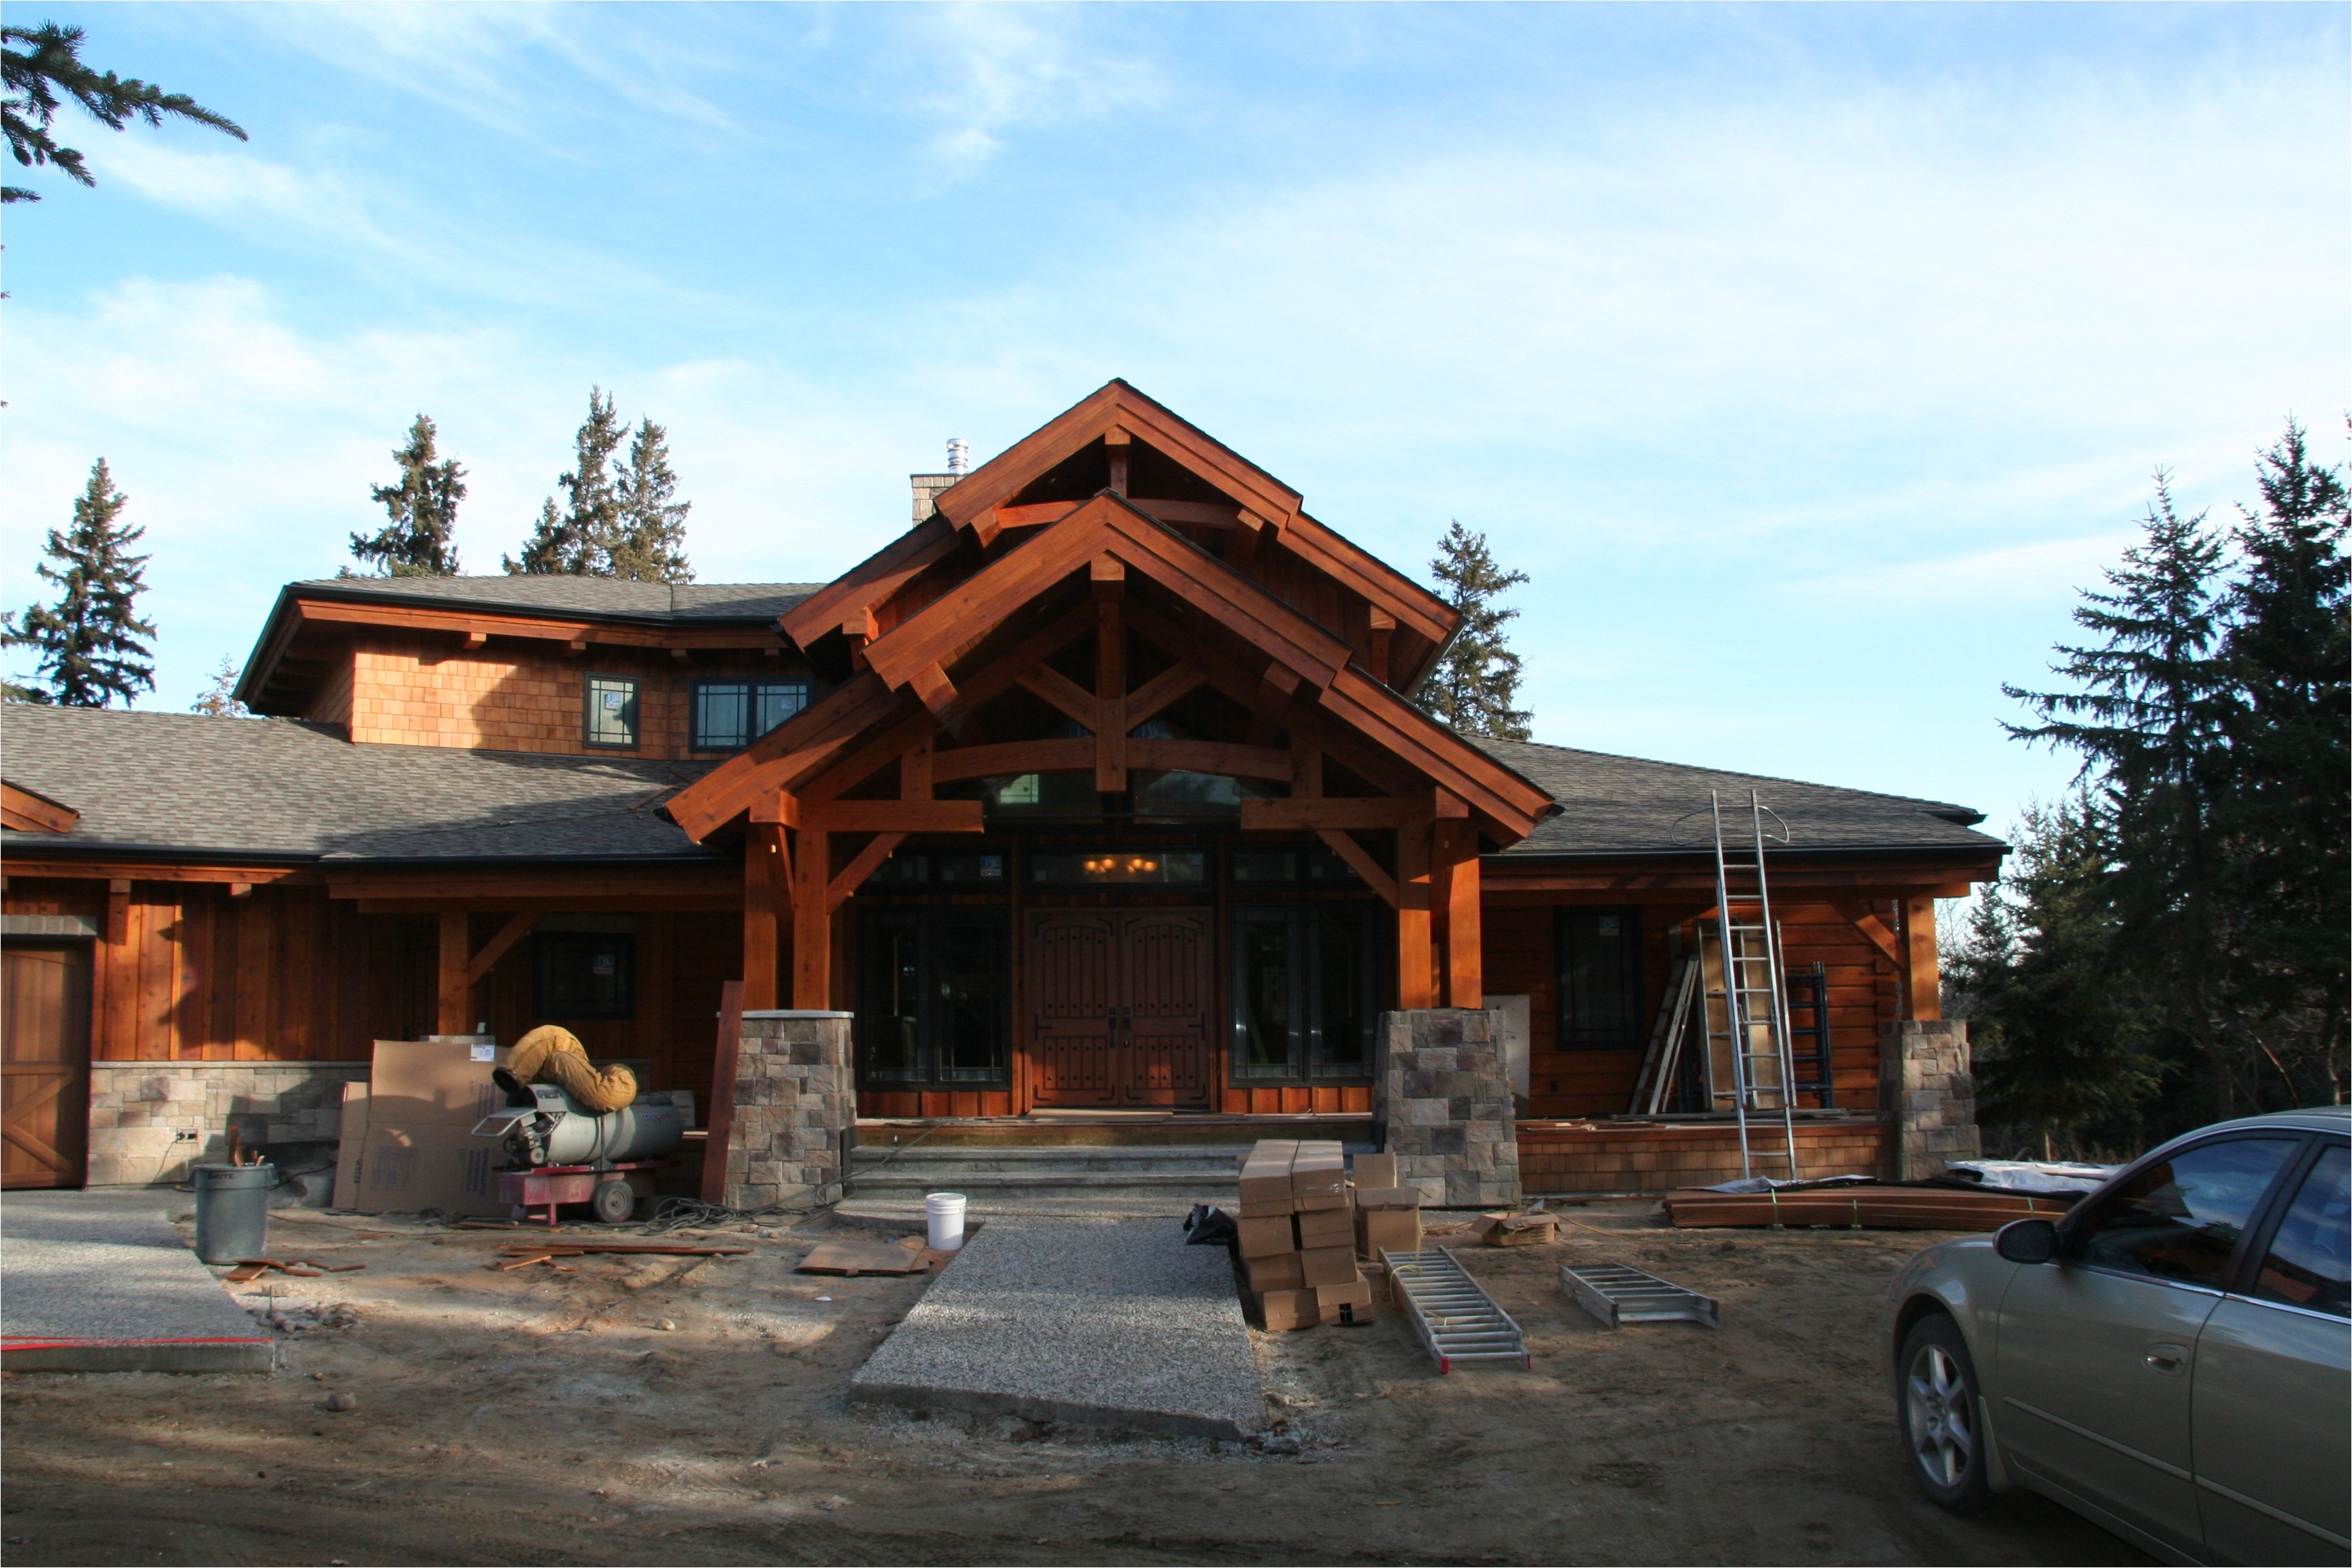 wood river log home plan comes to life in alberta canada